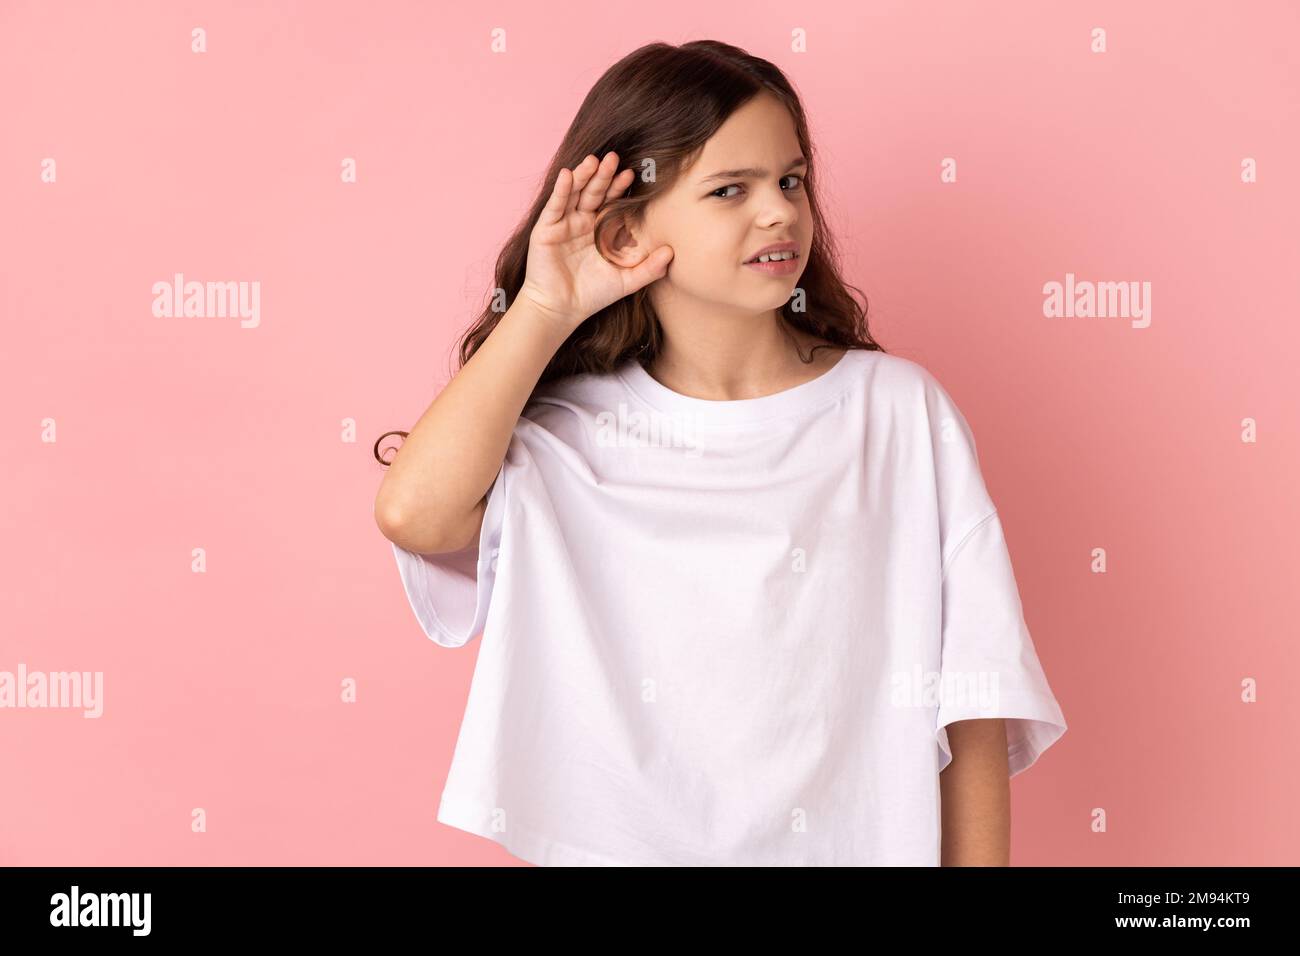 Portrait of curious little girl wearing white T-shirt holding hand near ear trying to hear secrets and find out gossips, listen to private whispers. Indoor studio shot isolated on pink background. Stock Photo